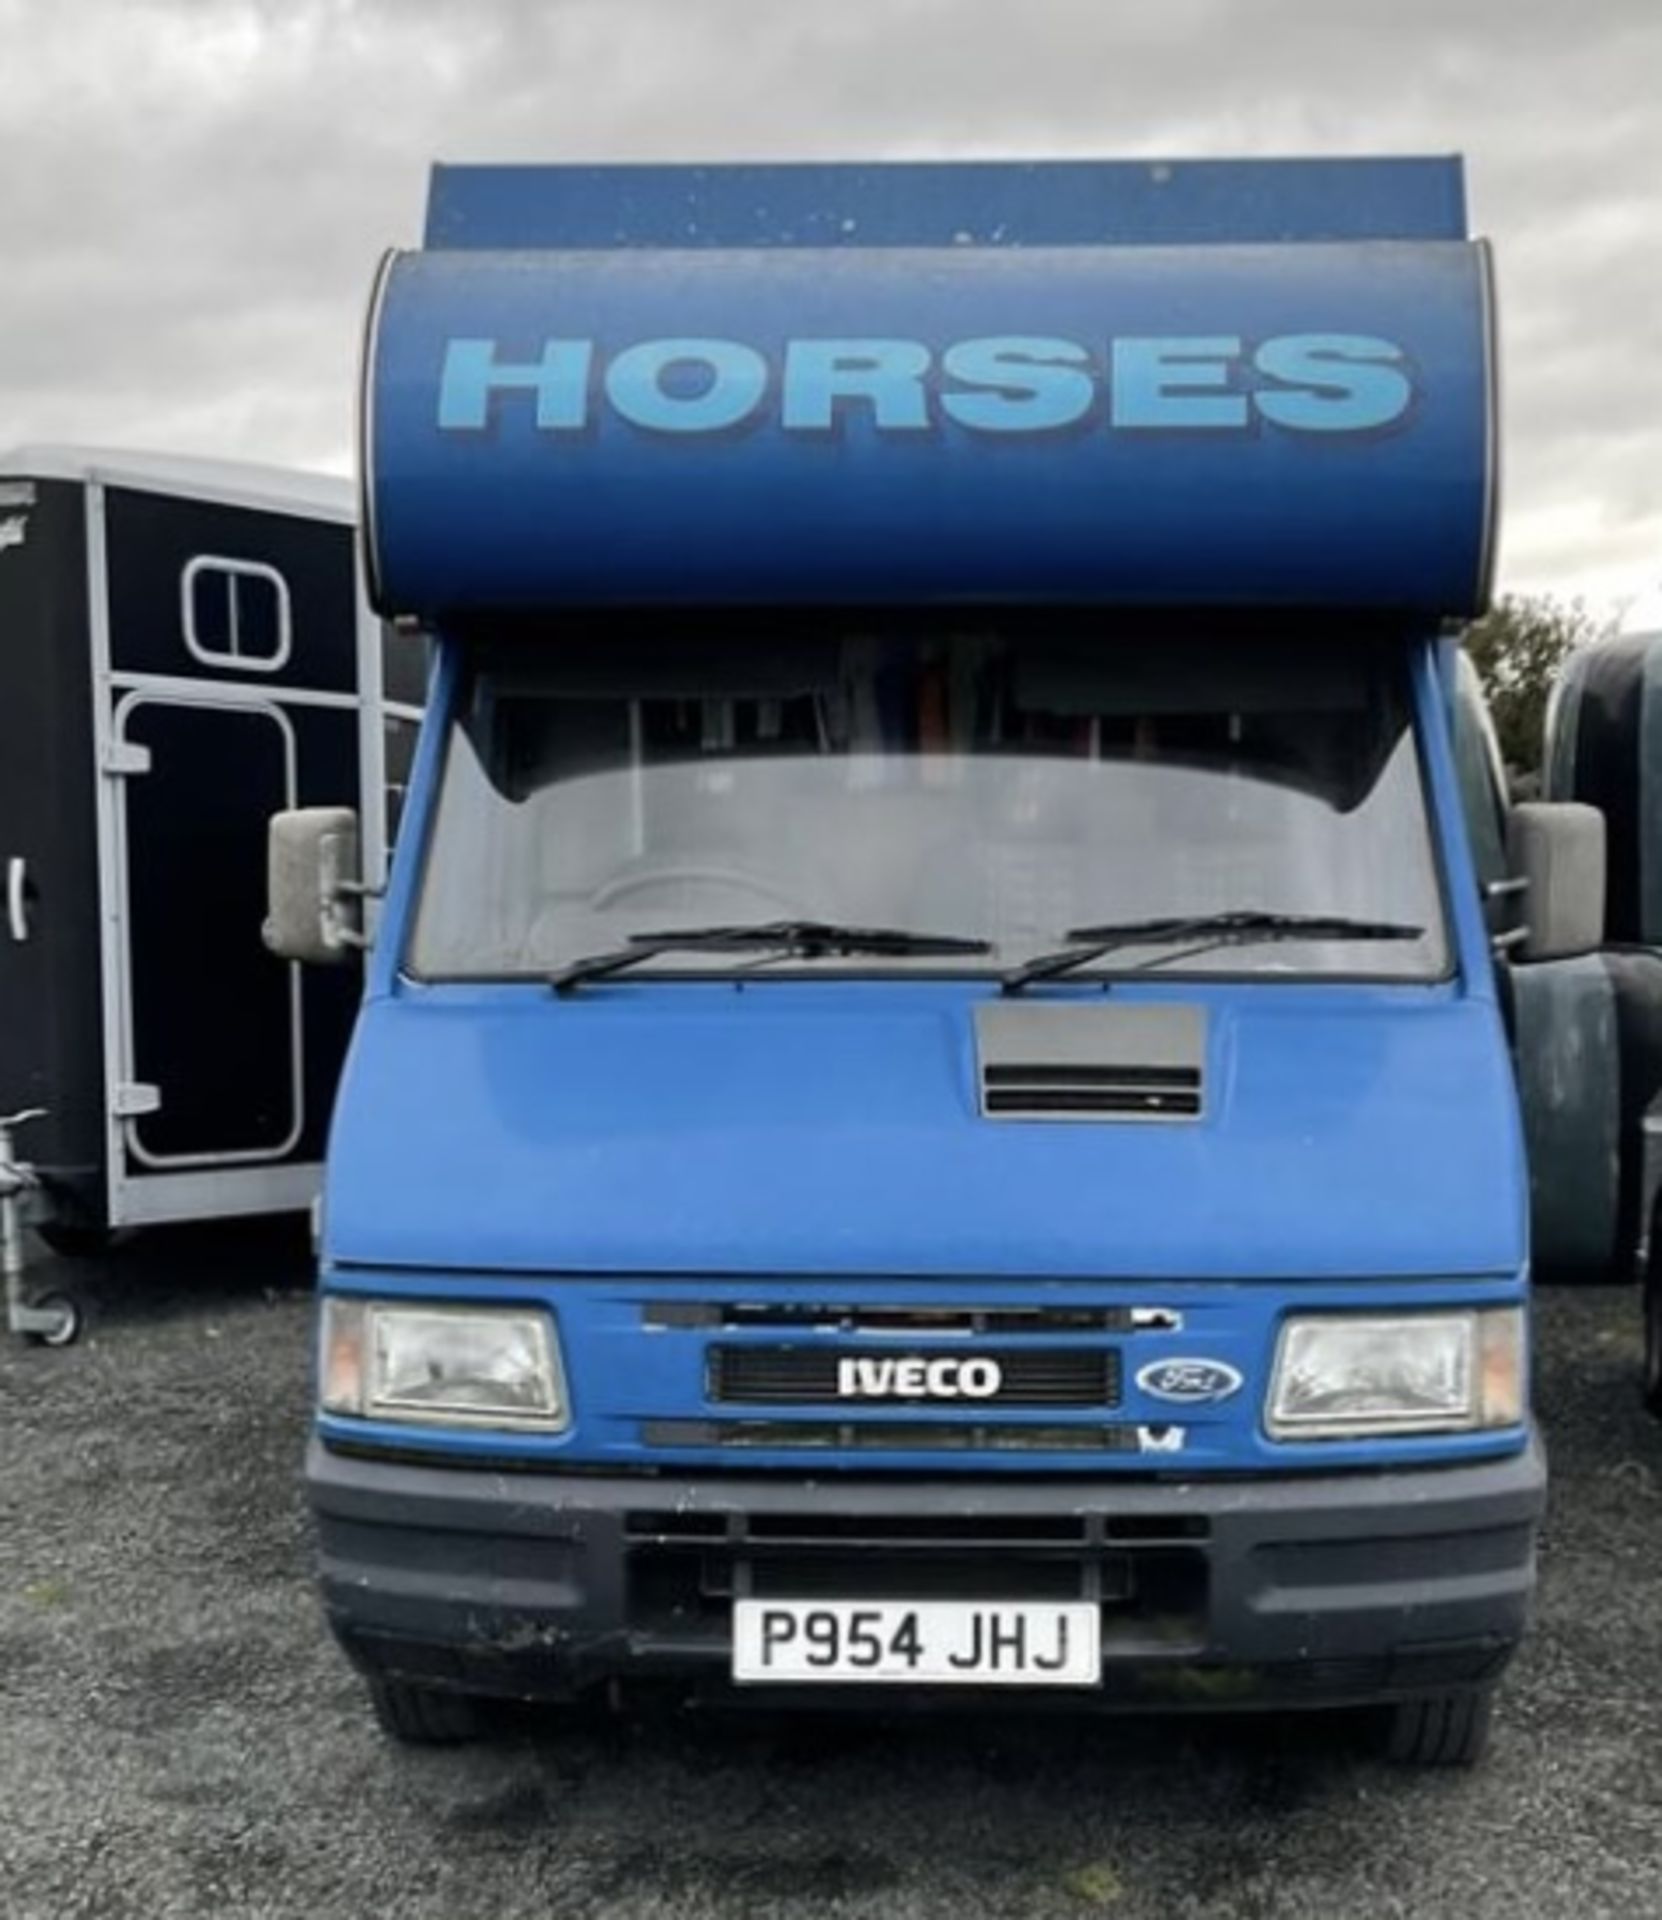 HORSEBOX TWO STALL IVECO .LOCATION NORTHERN IRELAND. - Image 6 of 8